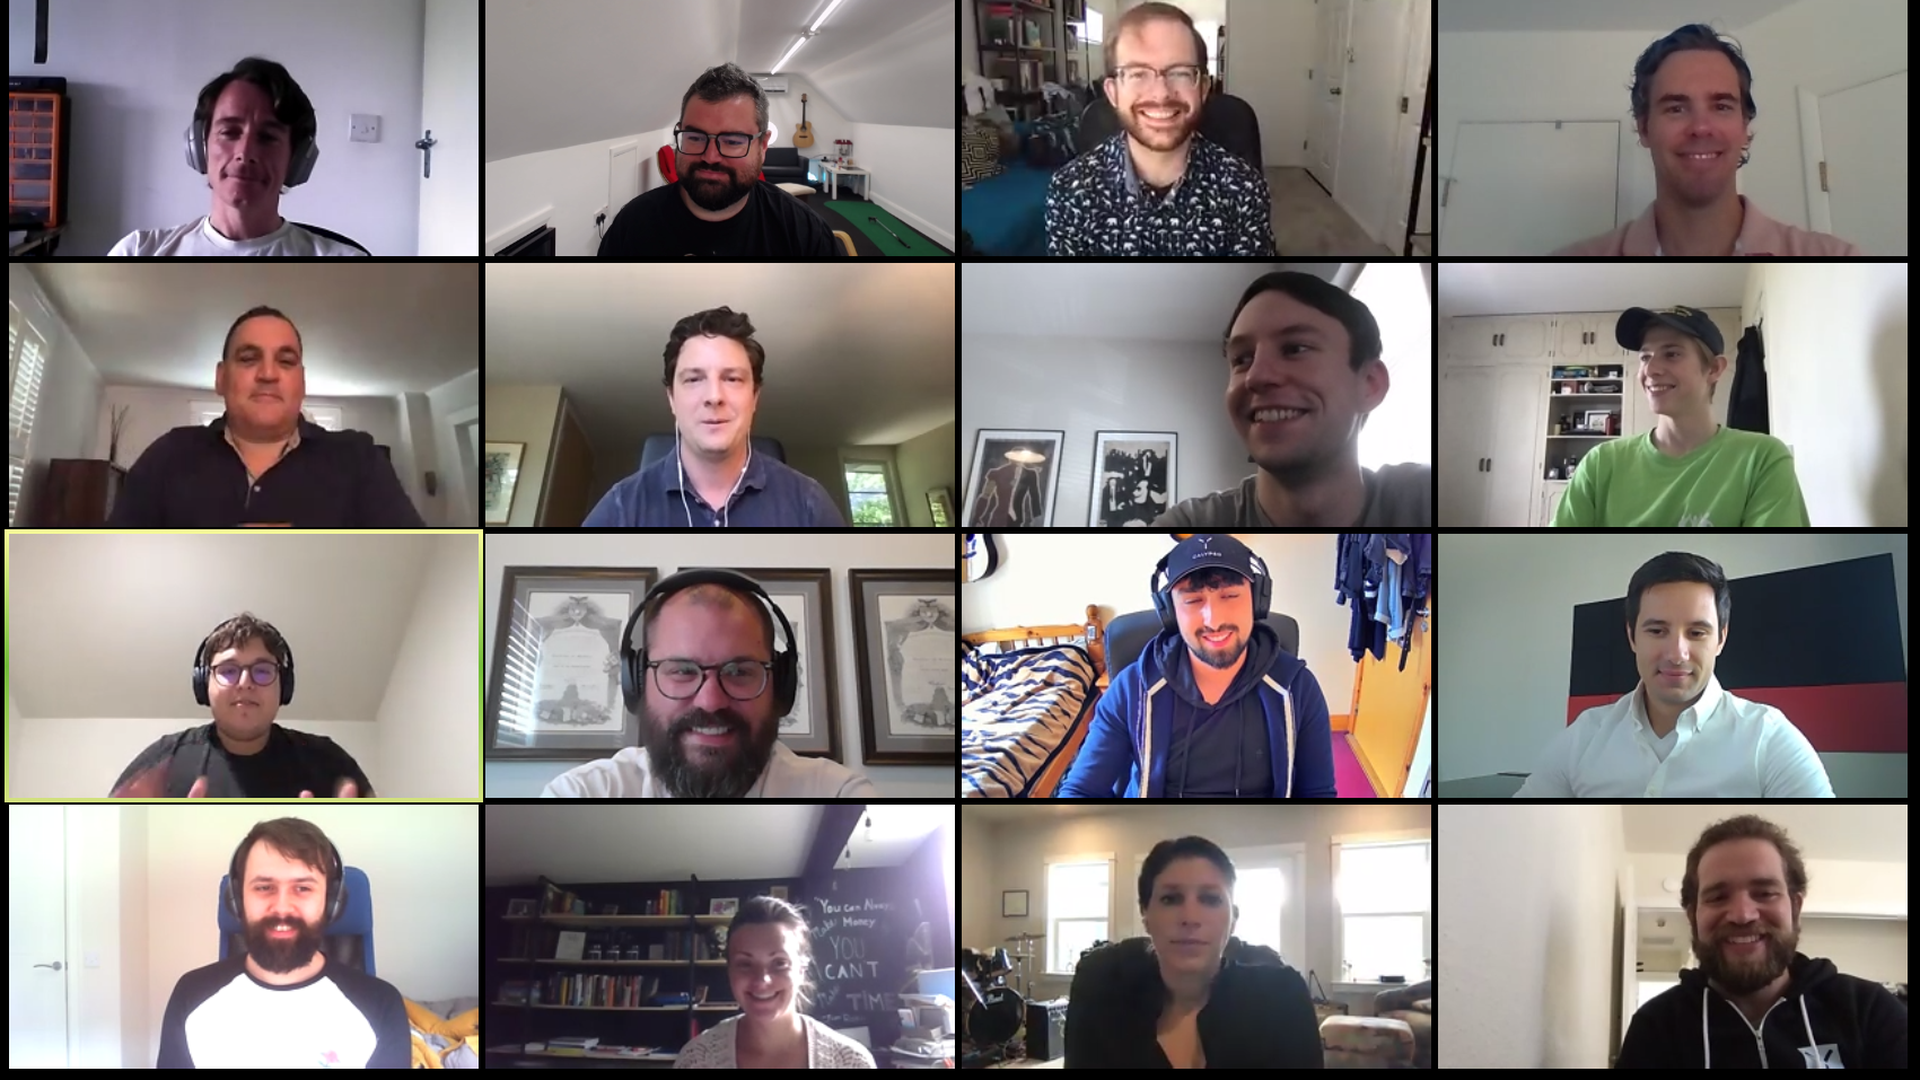 A screenshot of a Zoom call between roughly a dozen people, mostly white men.